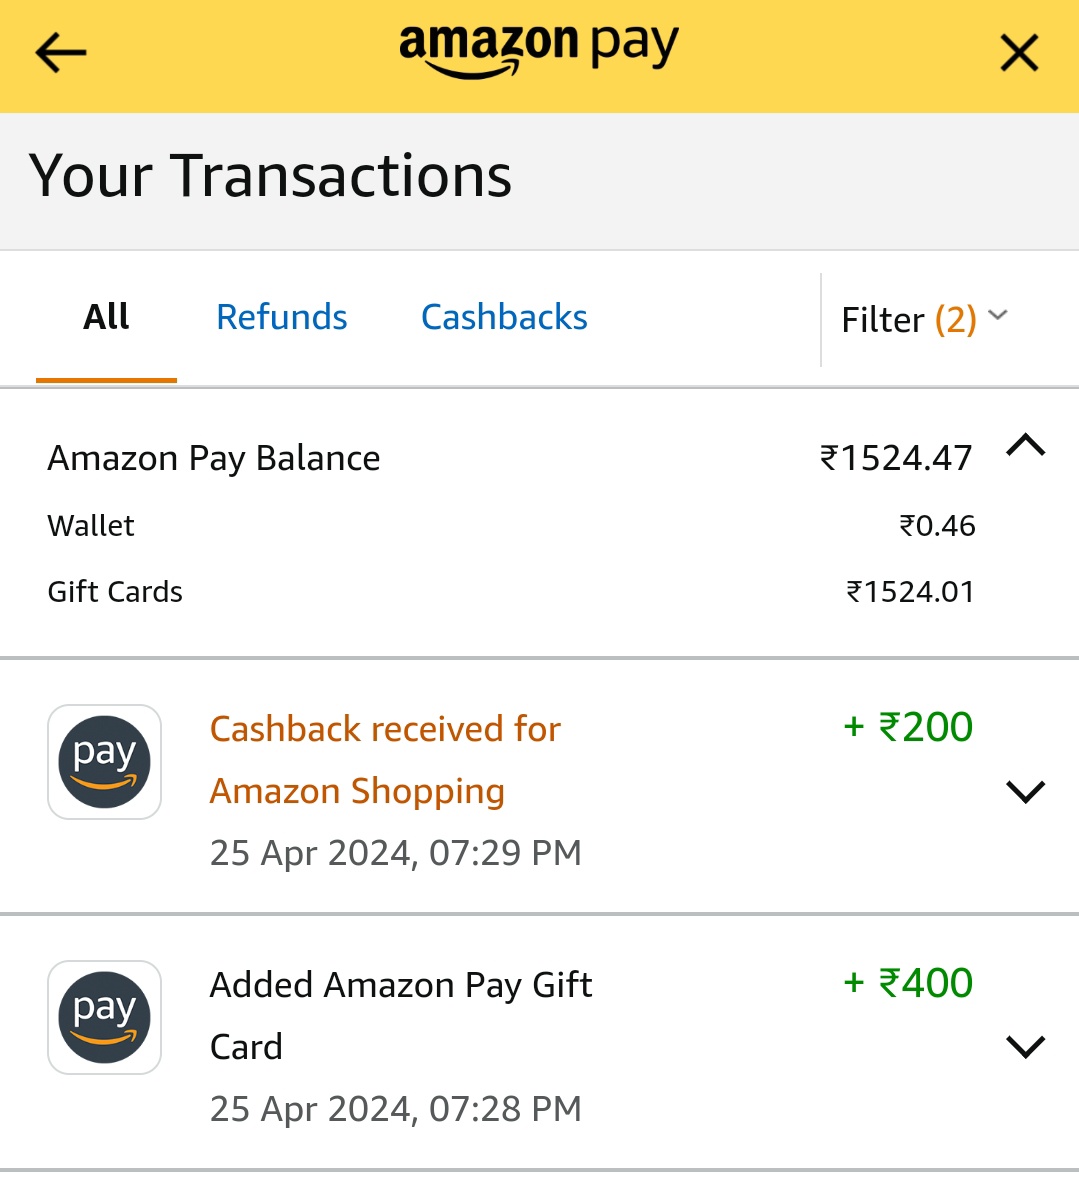 A must use Amazon Pay ICICI #creditcard offer 💯💥
✔️50% cashback upto Rs 200 on min spend of RS 100 on Amazon.
#ccgeek
✔️Go through this link & purchase any item or Gift Voucher (Min Rs 200) on Amazon & Get flat Rs 200 cashback🔥
 amzn.to/4dfiDcW
I just got Rs 200 🥳